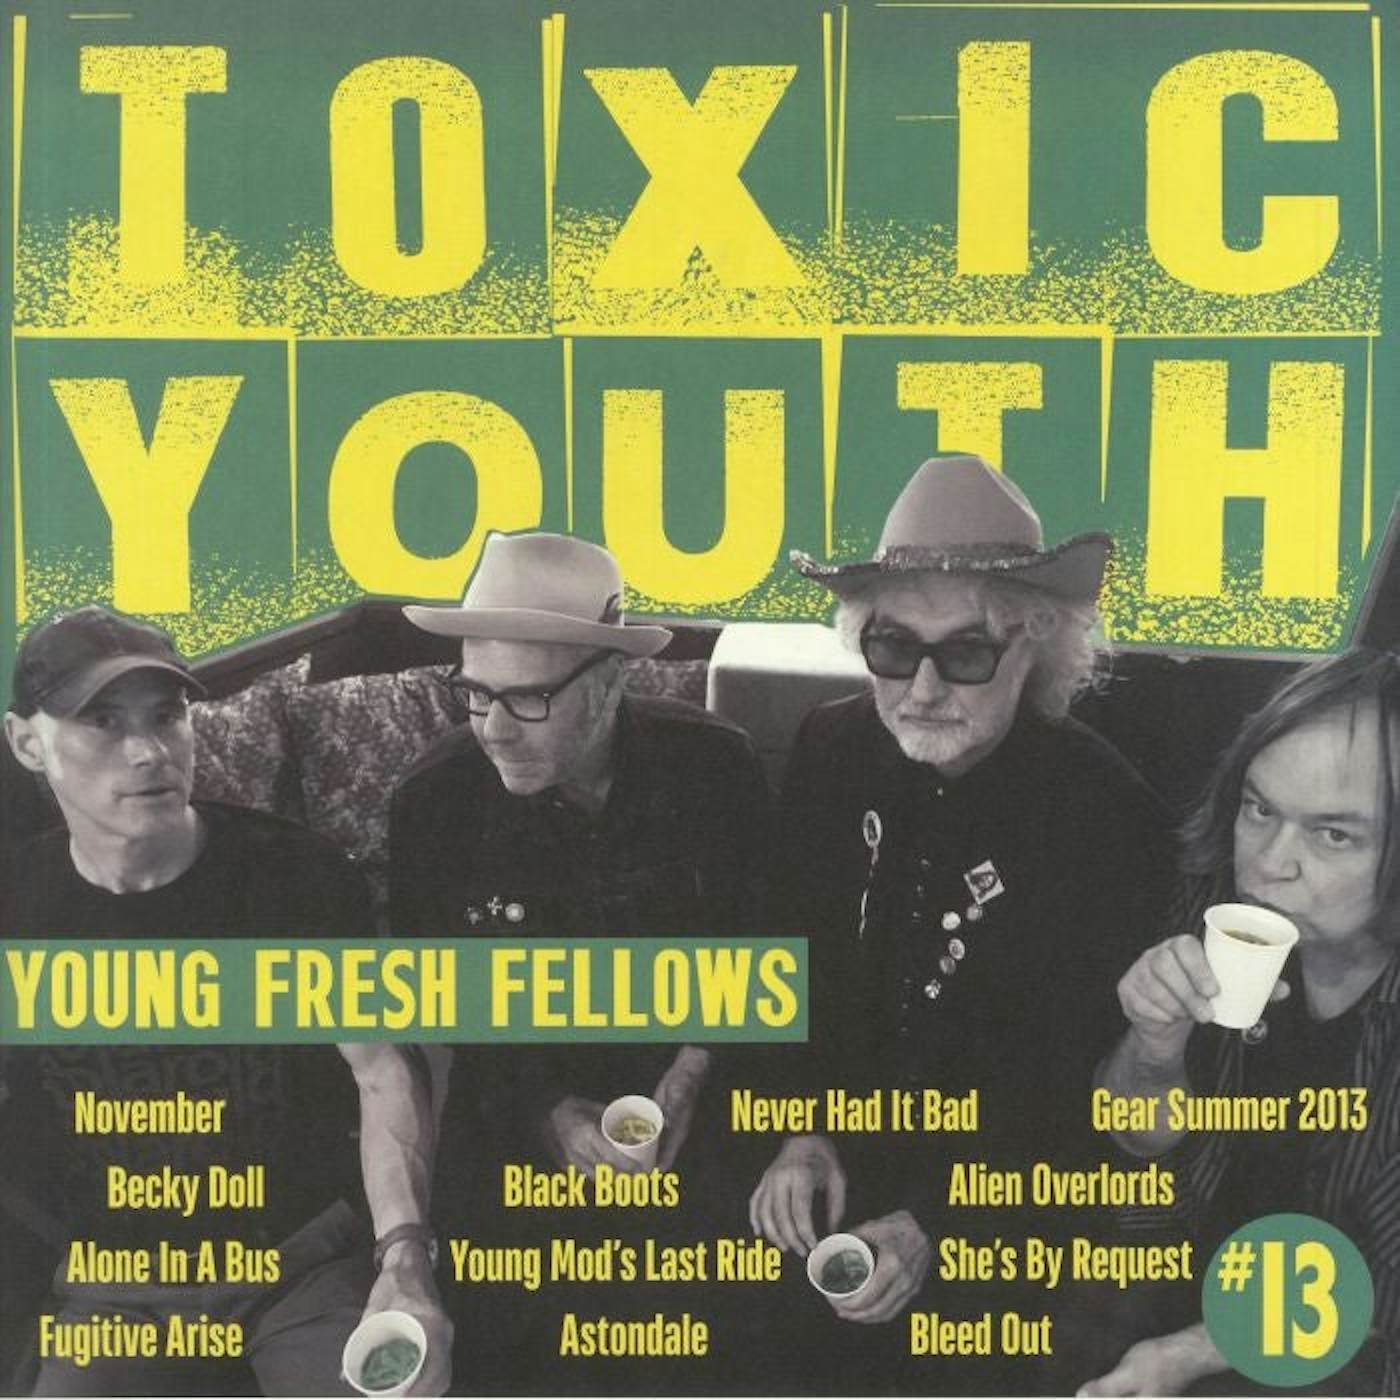 The Young Fresh Fellows LP Vinyl Record - Toxic Youth (Toxic Transparent Green Vinyl) (Fanzine-Style Packaging & Booklet) (RSD 20. 20. )